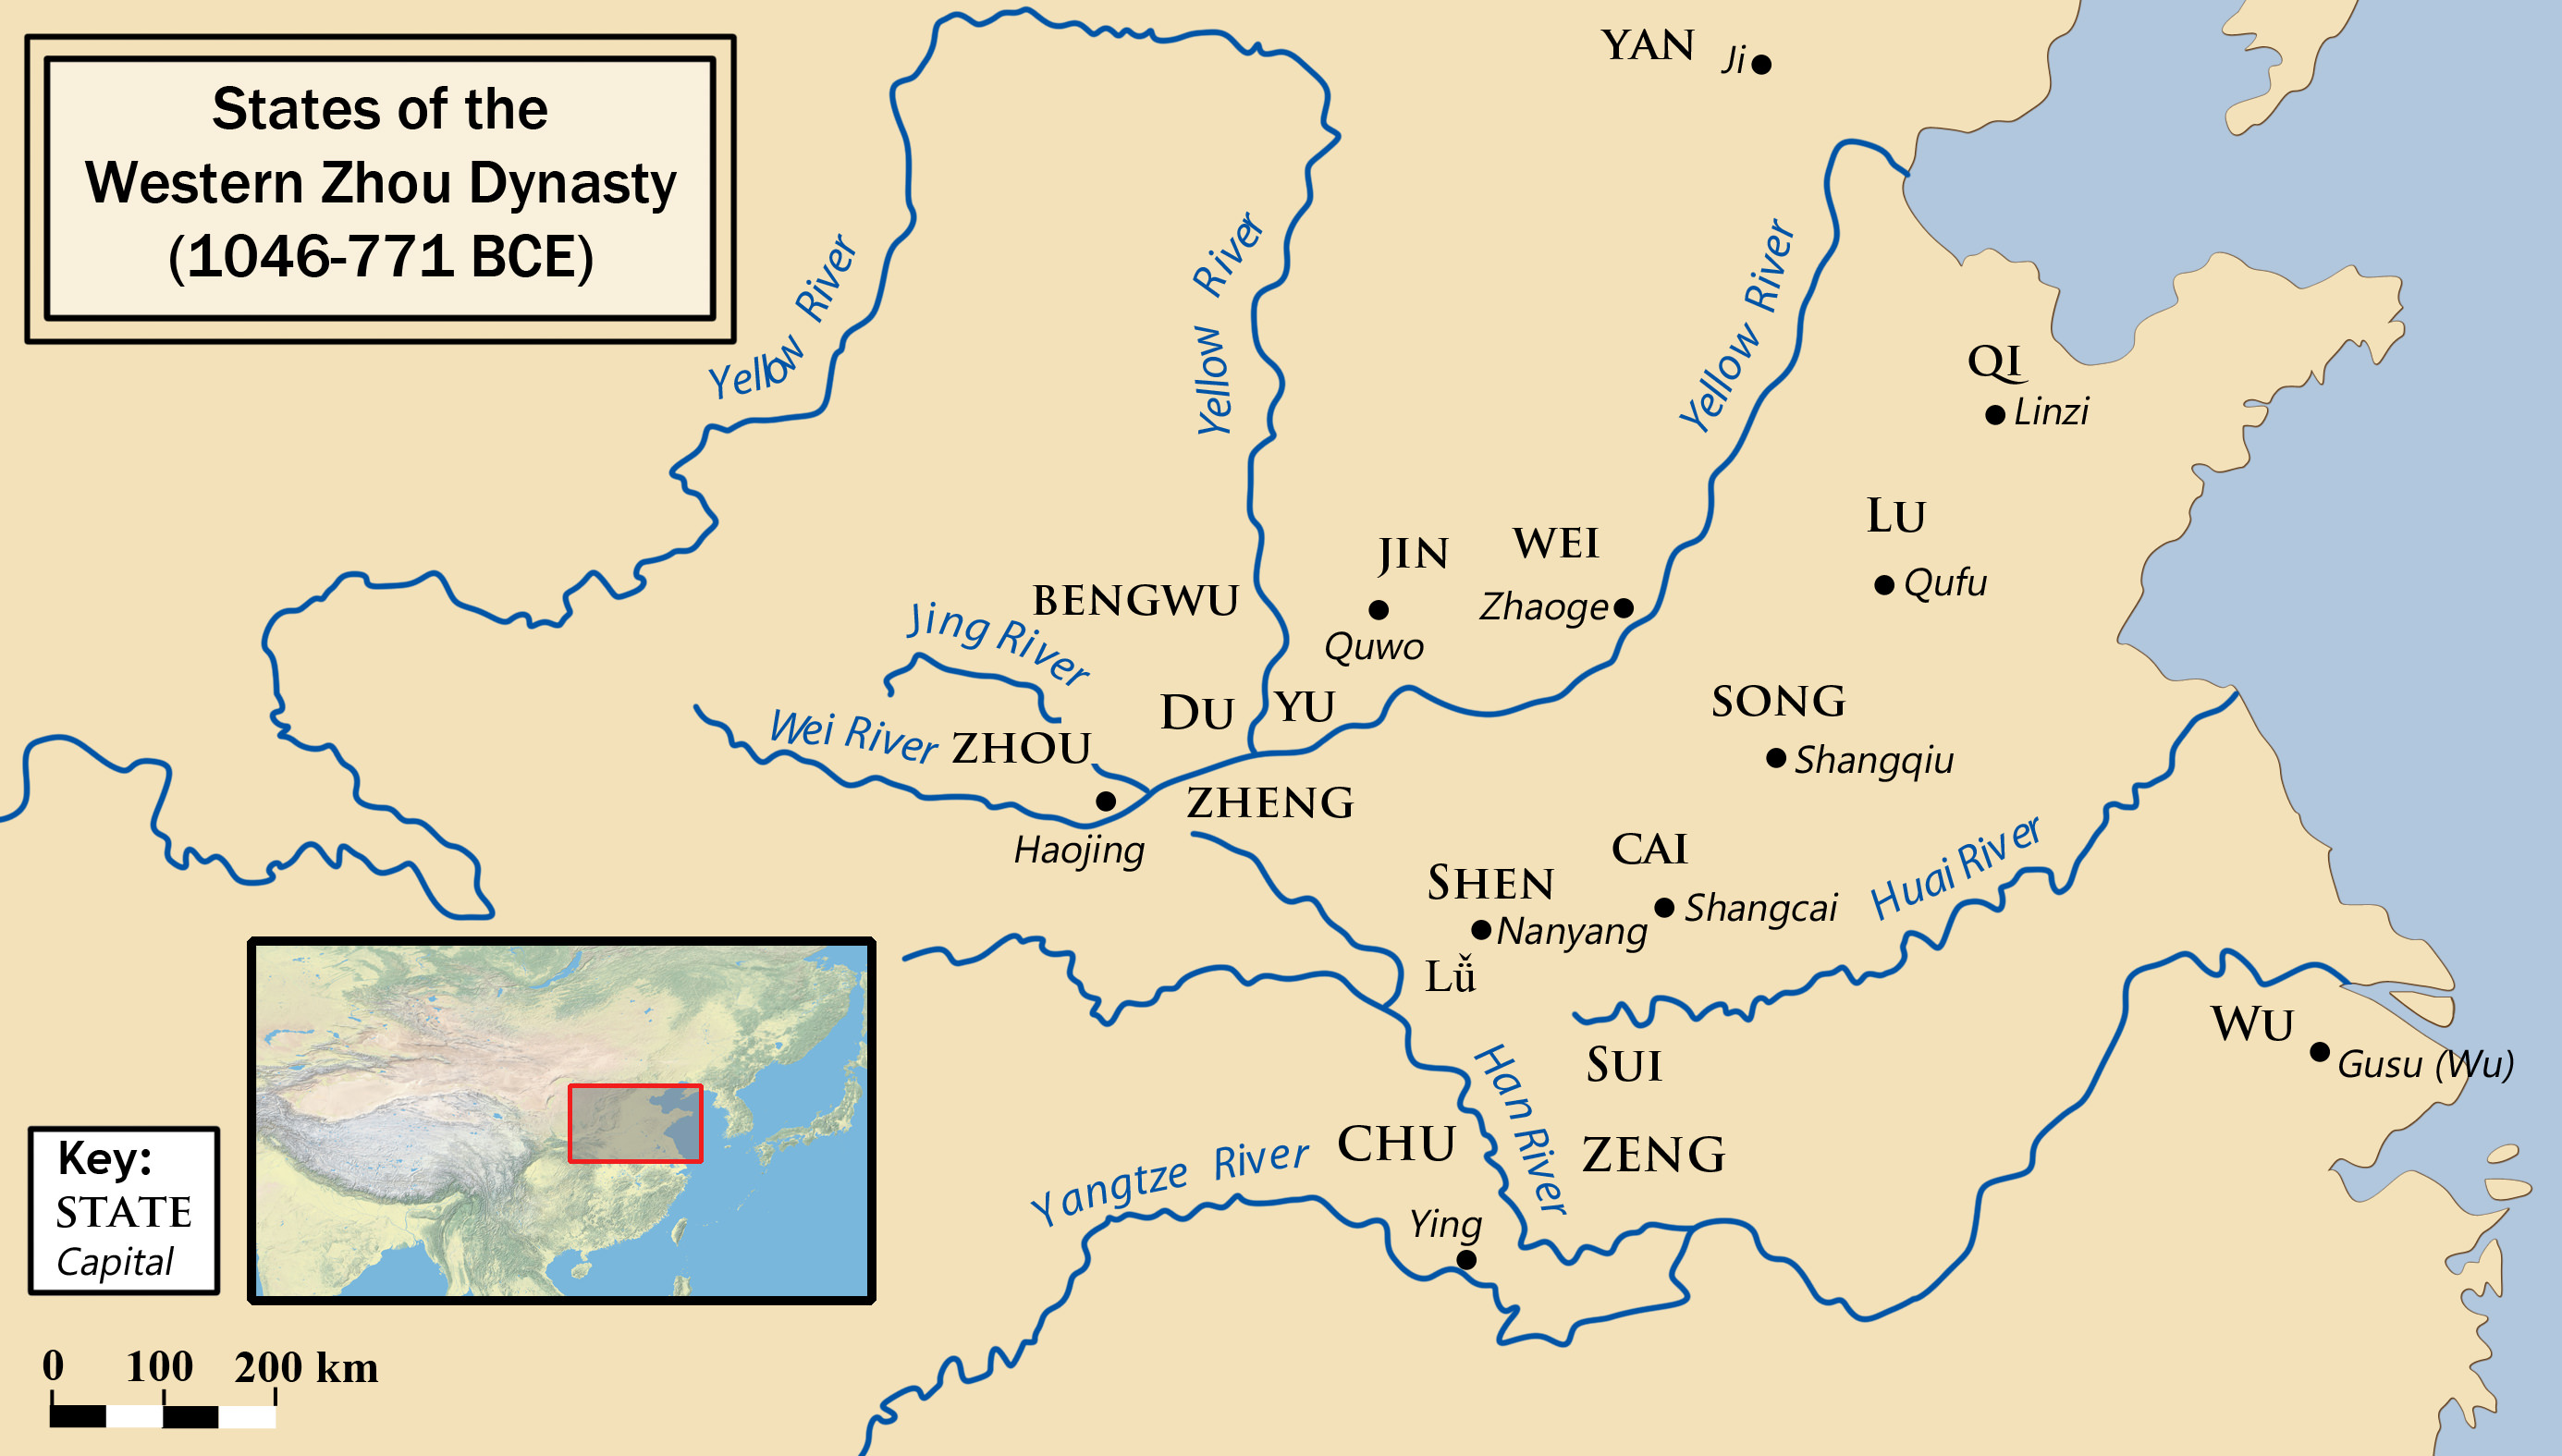 The states during the Western Zhou period (1056-771 BCE) in China. Shows the Yellow River and Yangtze River.